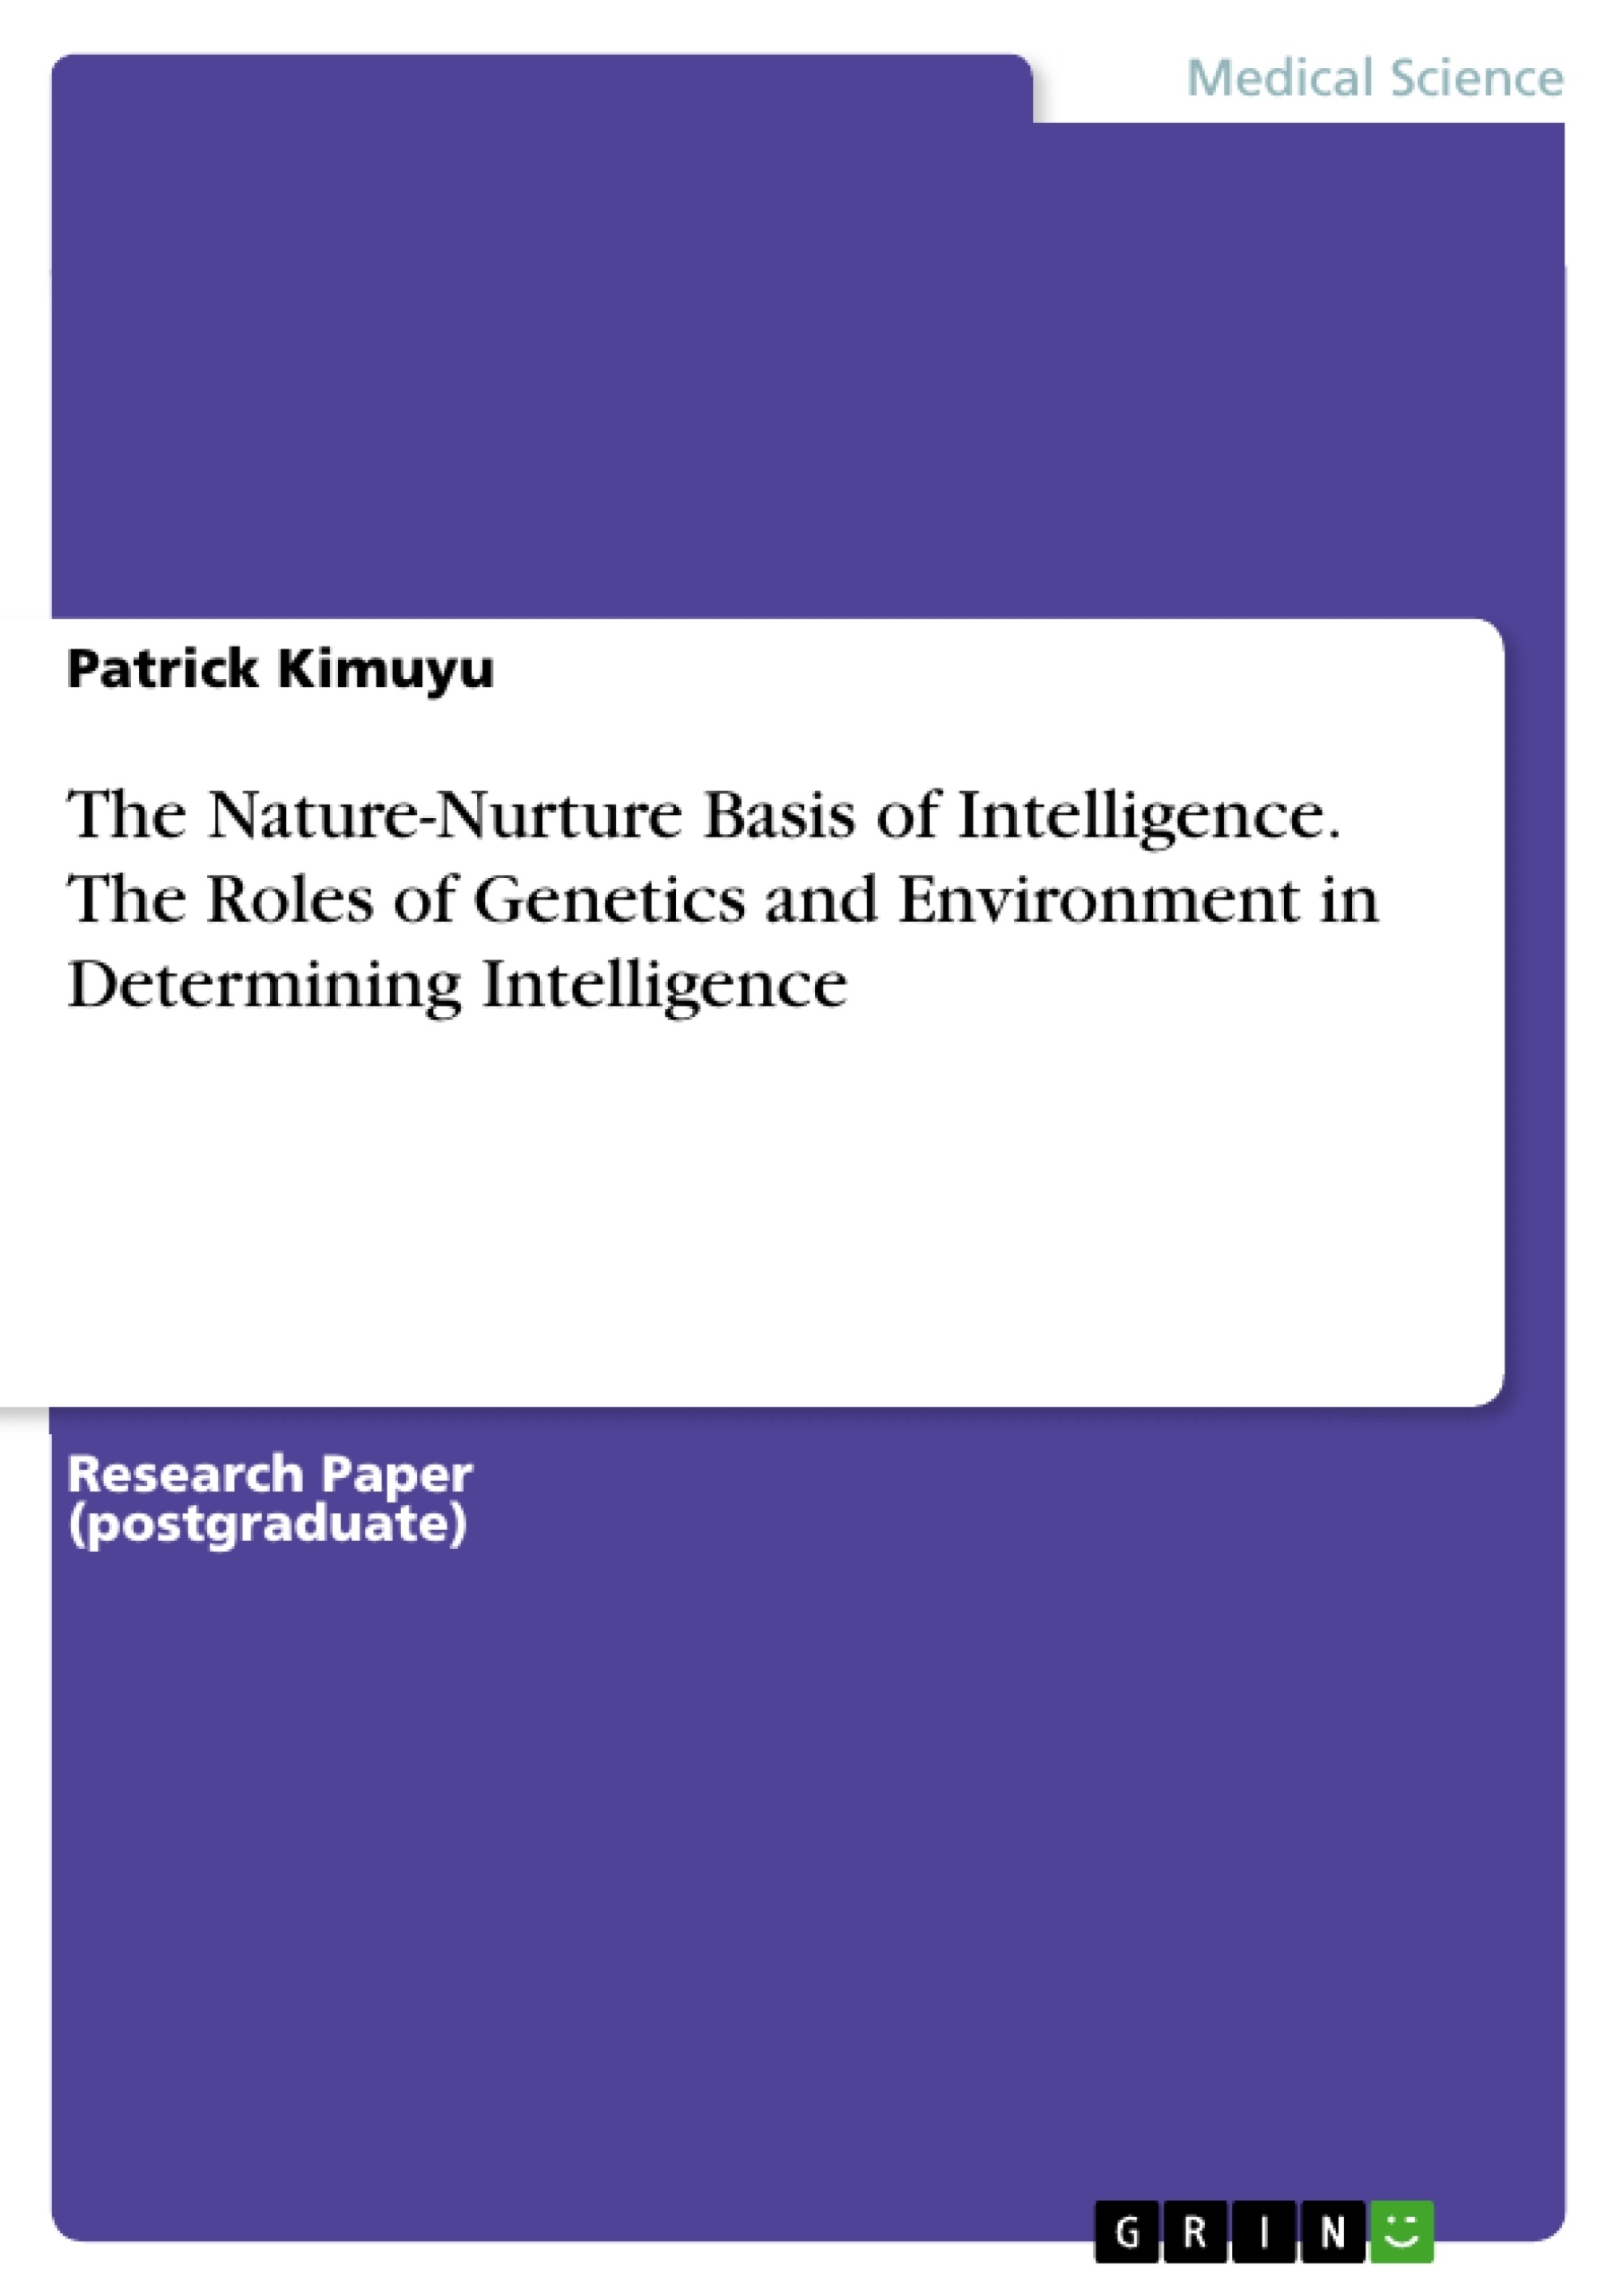 Titre: The Nature-Nurture Basis of Intelligence. The Roles of Genetics and Environment in Determining Intelligence